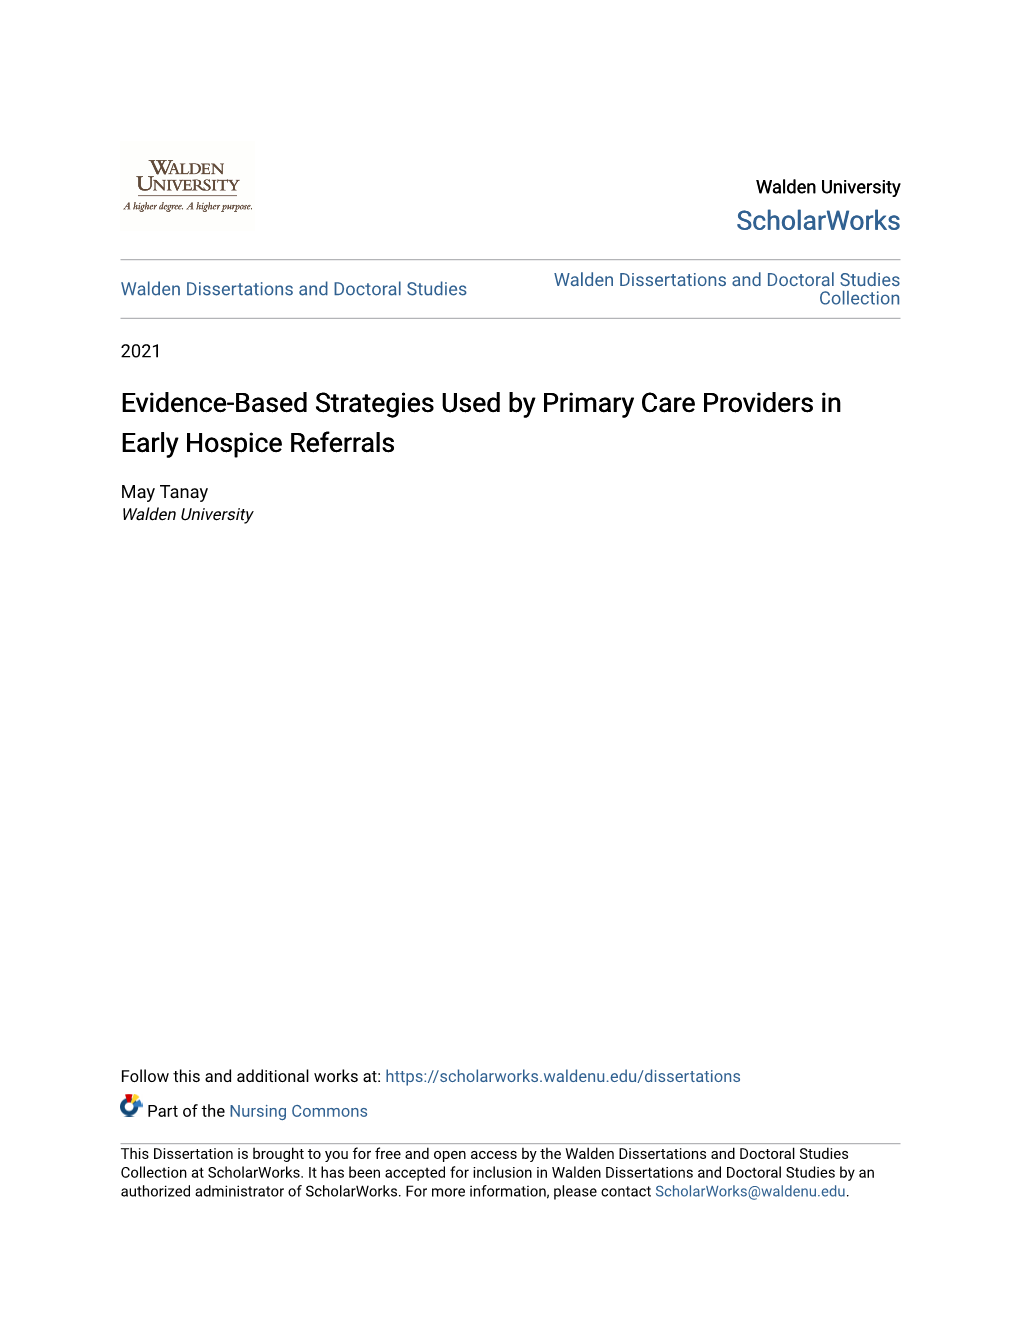 Evidence-Based Strategies Used by Primary Care Providers in Early Hospice Referrals